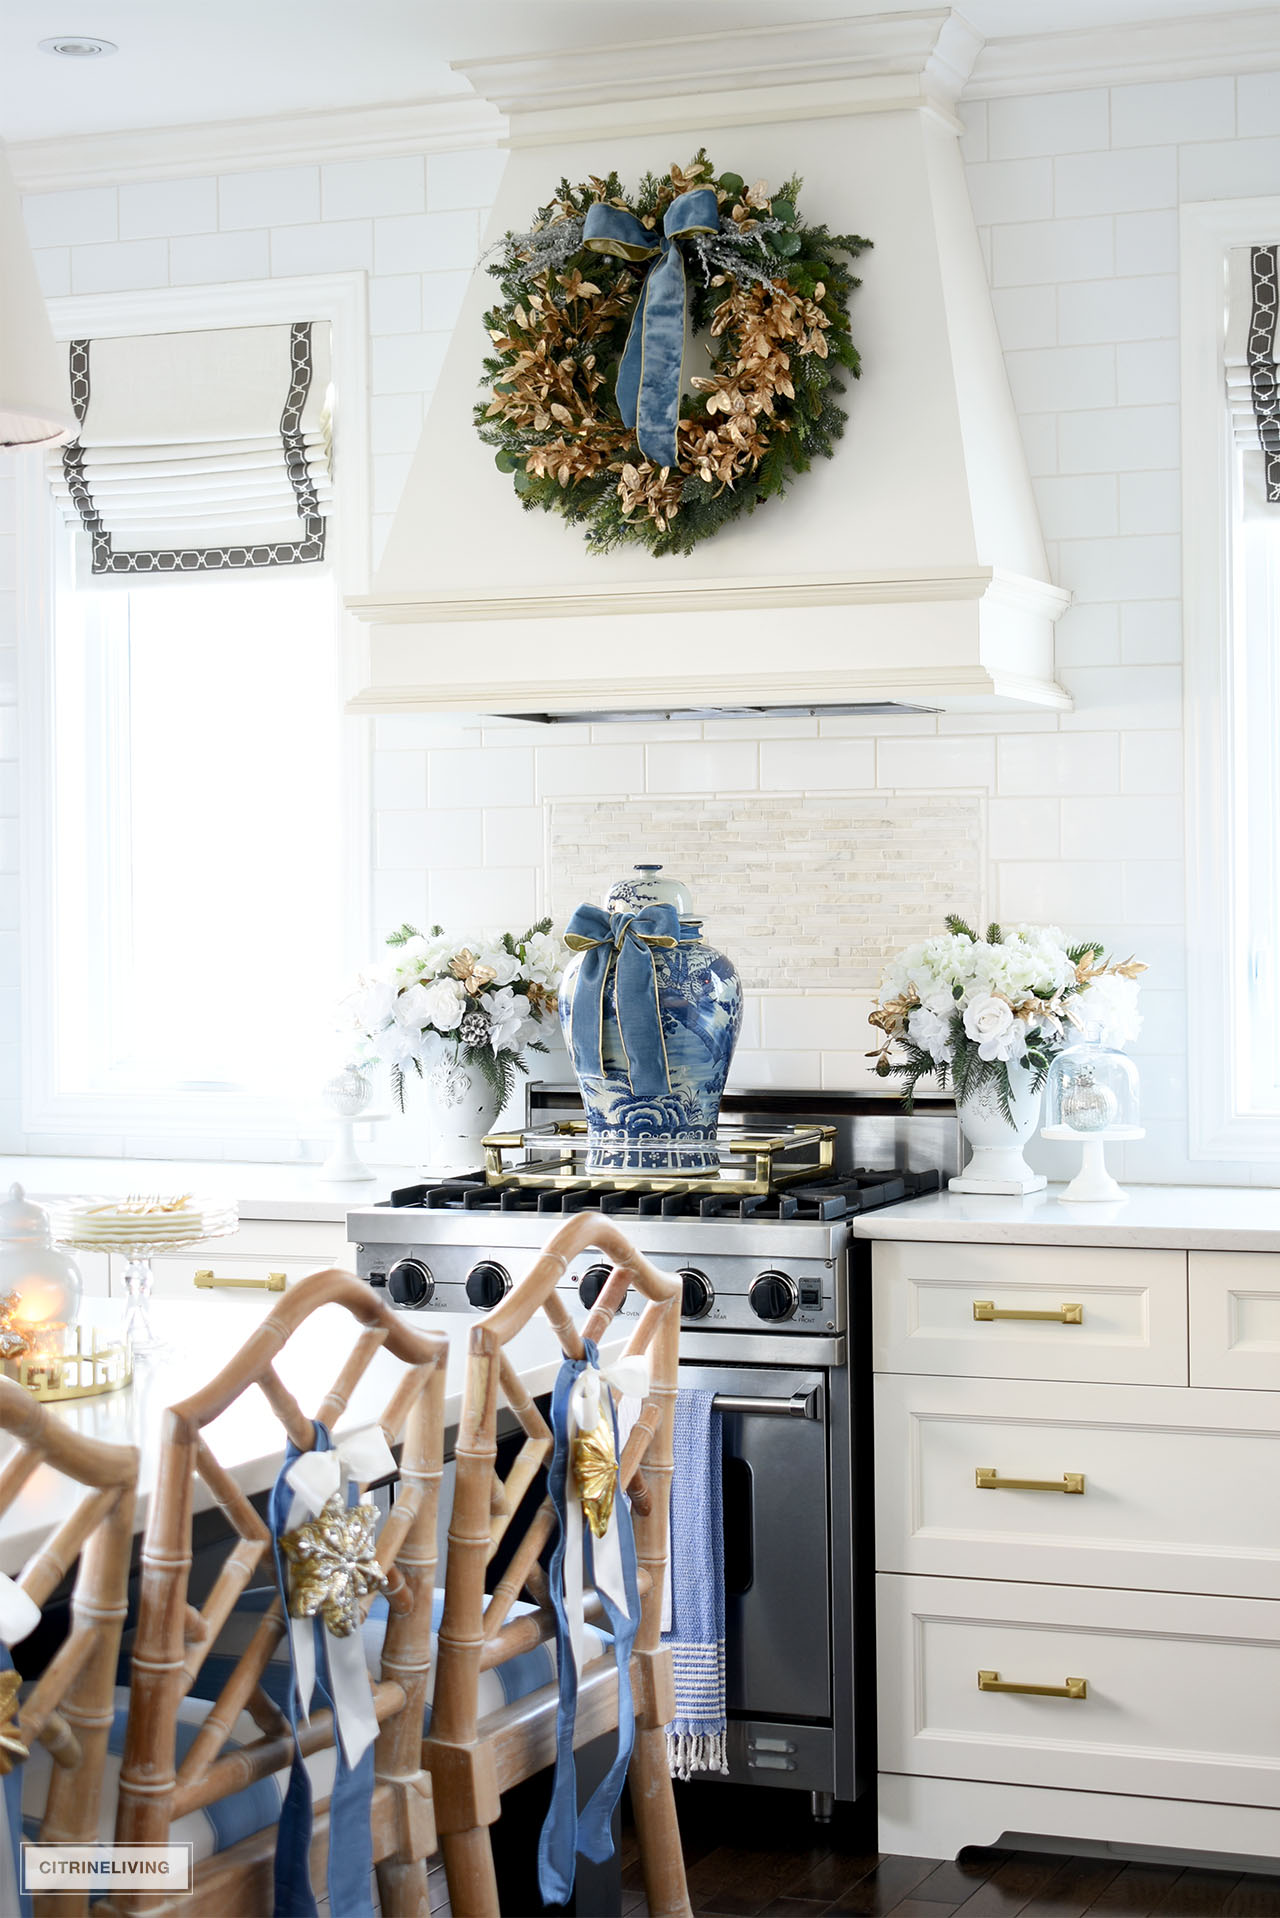 Range hood styled with a lush green and gold wreath with blue velvet ribbon hangs above an oversized blue and white ginger jar and gold tray on the stove. Gorgeous white, green and gold floral arrangements sit on either side of the stove.